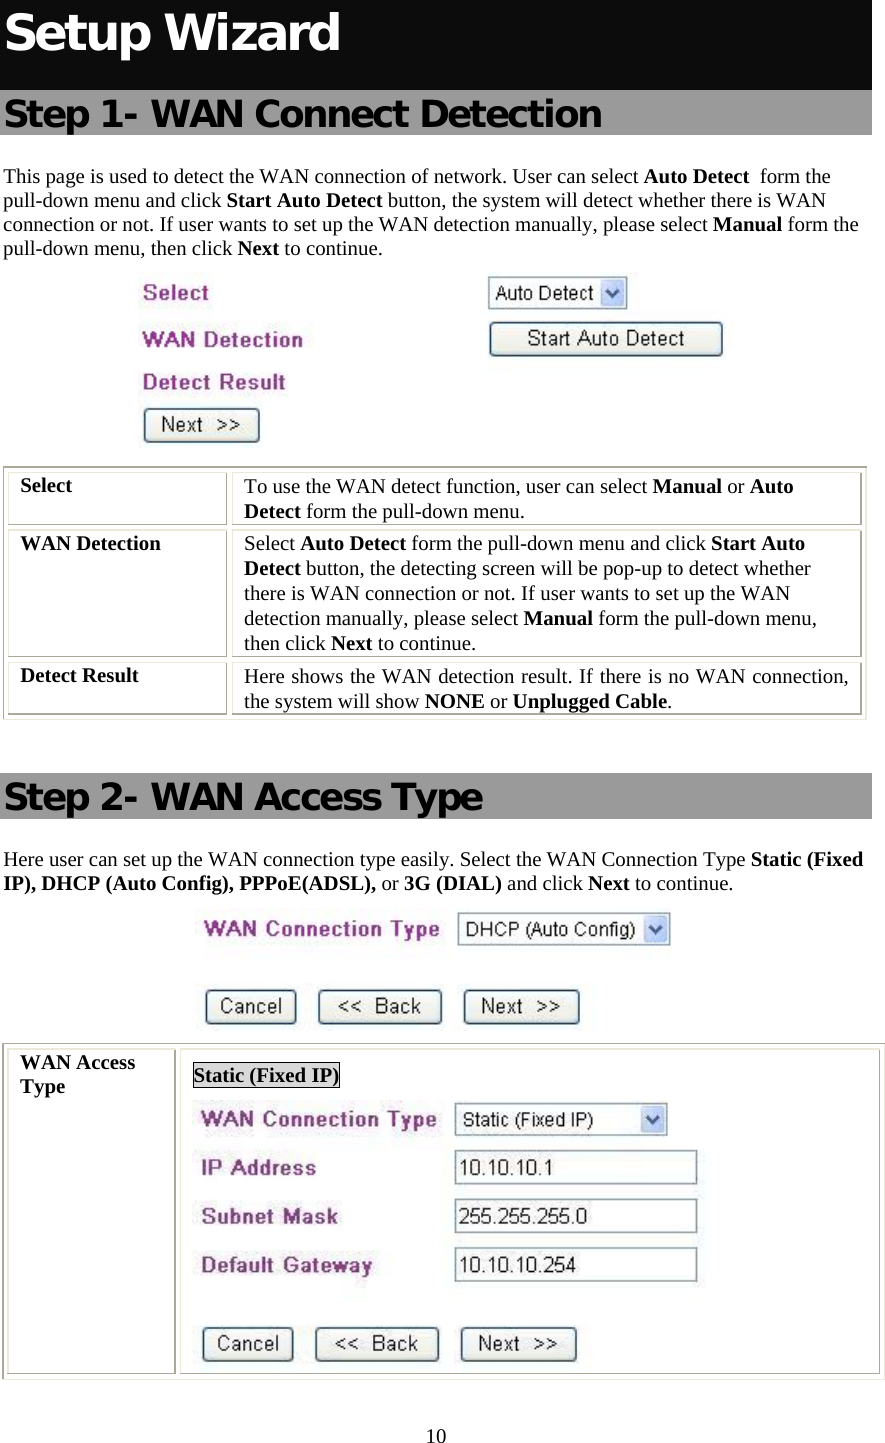   10 Setup Wizard Step 1- WAN Connect Detection This page is used to detect the WAN connection of network. User can select Auto Detect  form the pull-down menu and click Start Auto Detect button, the system will detect whether there is WAN connection or not. If user wants to set up the WAN detection manually, please select Manual form the pull-down menu, then click Next to continue.  Select  To use the WAN detect function, user can select Manual or Auto  Detect form the pull-down menu.  WAN Detection  Select Auto Detect form the pull-down menu and click Start Auto Detect button, the detecting screen will be pop-up to detect whether there is WAN connection or not. If user wants to set up the WAN detection manually, please select Manual form the pull-down menu, then click Next to continue. Detect Result  Here shows the WAN detection result. If there is no WAN connection, the system will show NONE or Unplugged Cable.  Step 2- WAN Access Type Here user can set up the WAN connection type easily. Select the WAN Connection Type Static (Fixed IP), DHCP (Auto Config), PPPoE(ADSL), or 3G (DIAL) and click Next to continue.  WAN Access Type  Static (Fixed IP)  